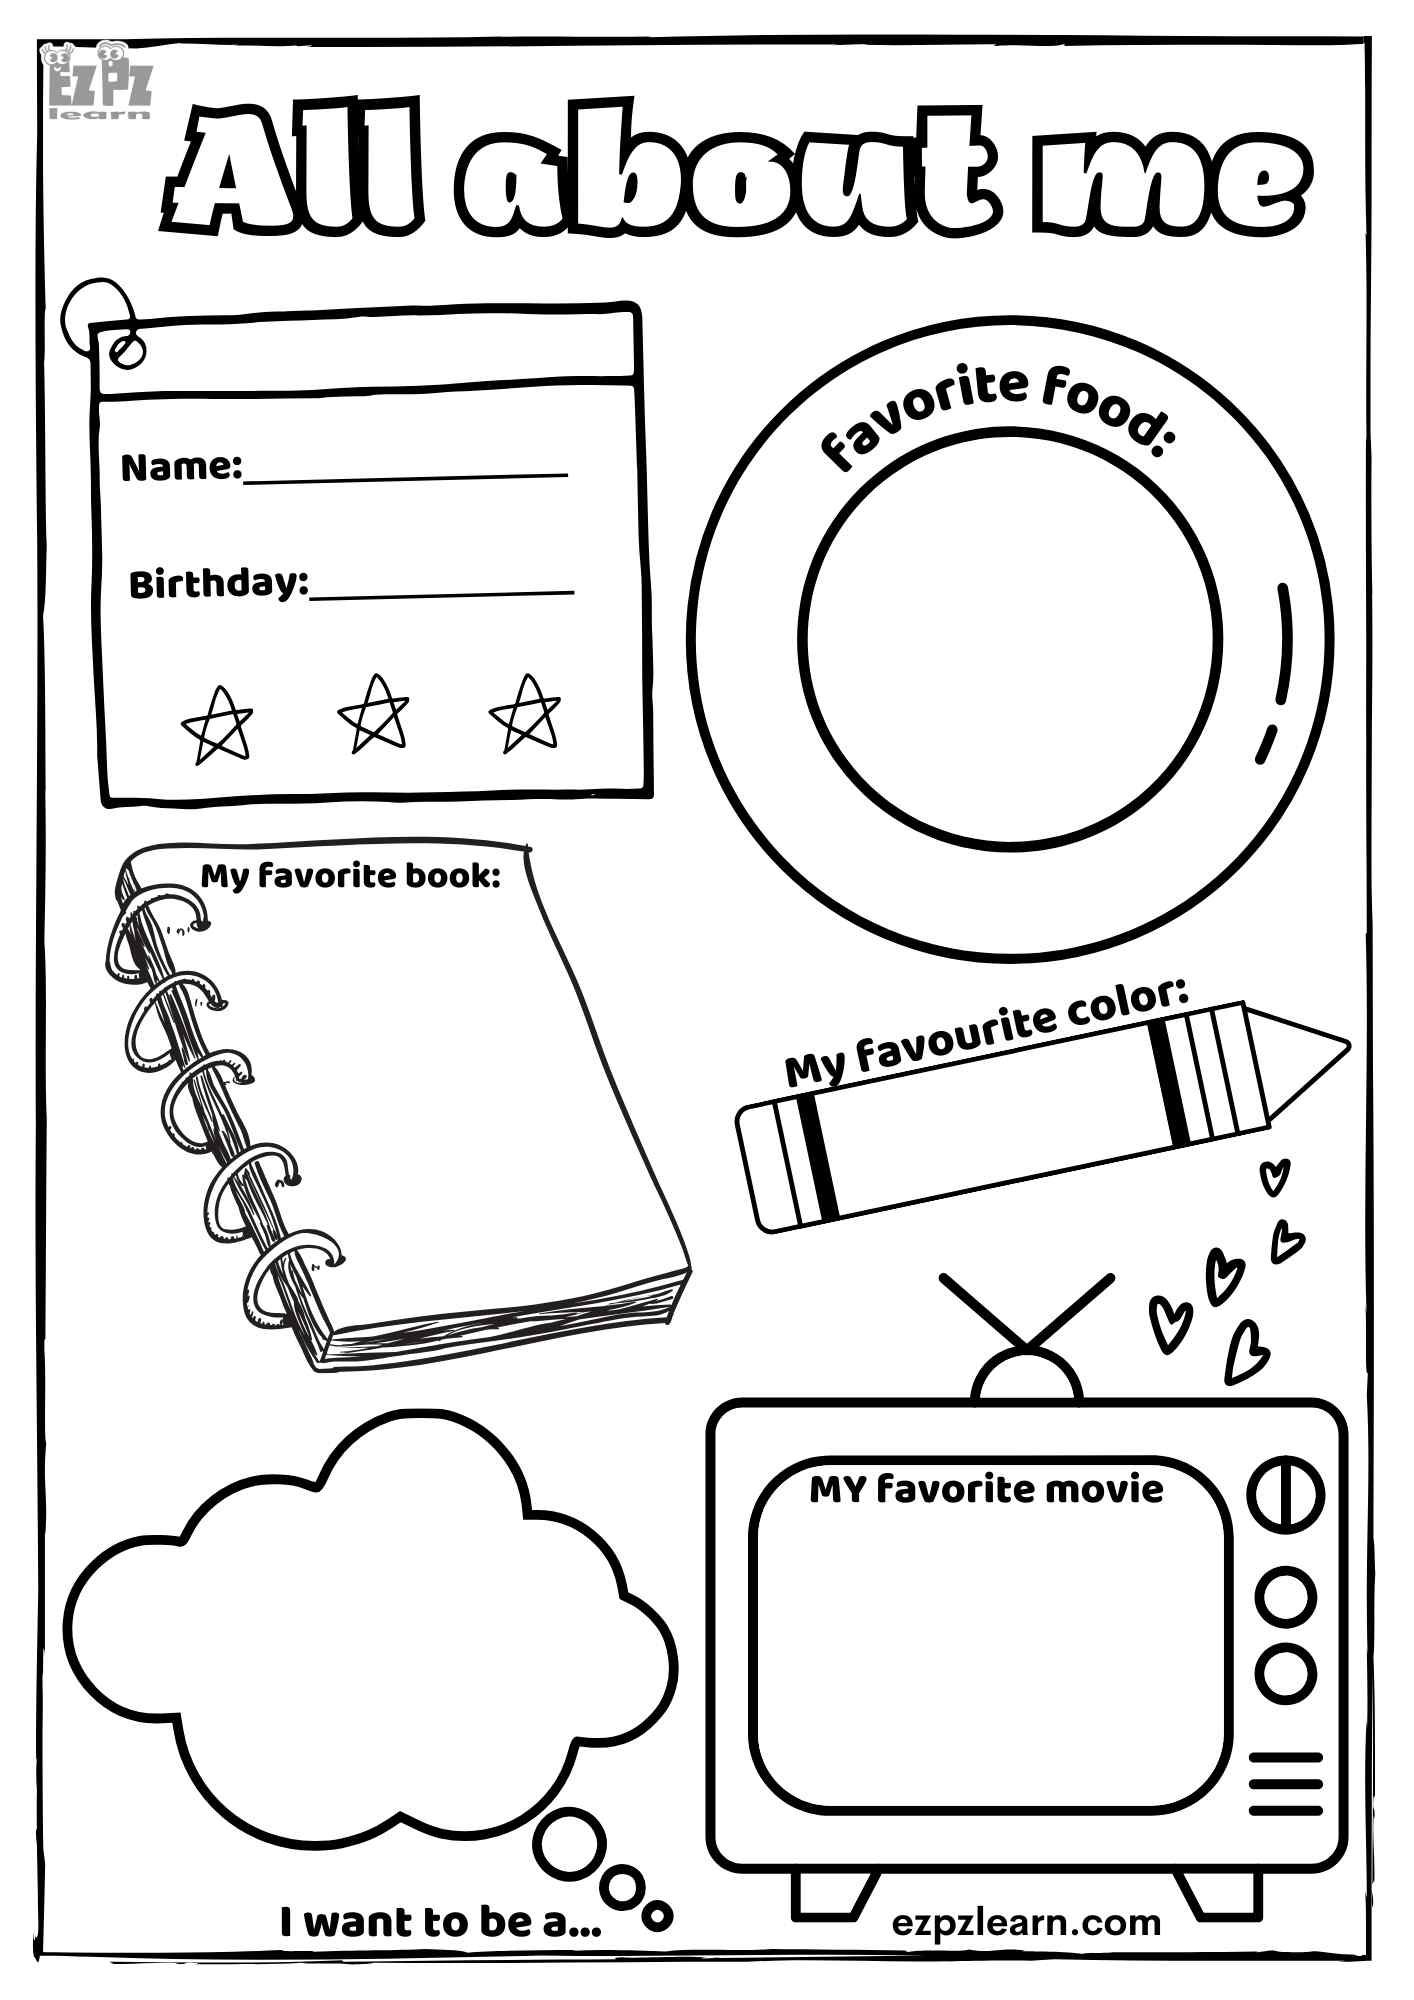 All About Me Drawing Worksheet for Preschool and Kindergarten Students ...